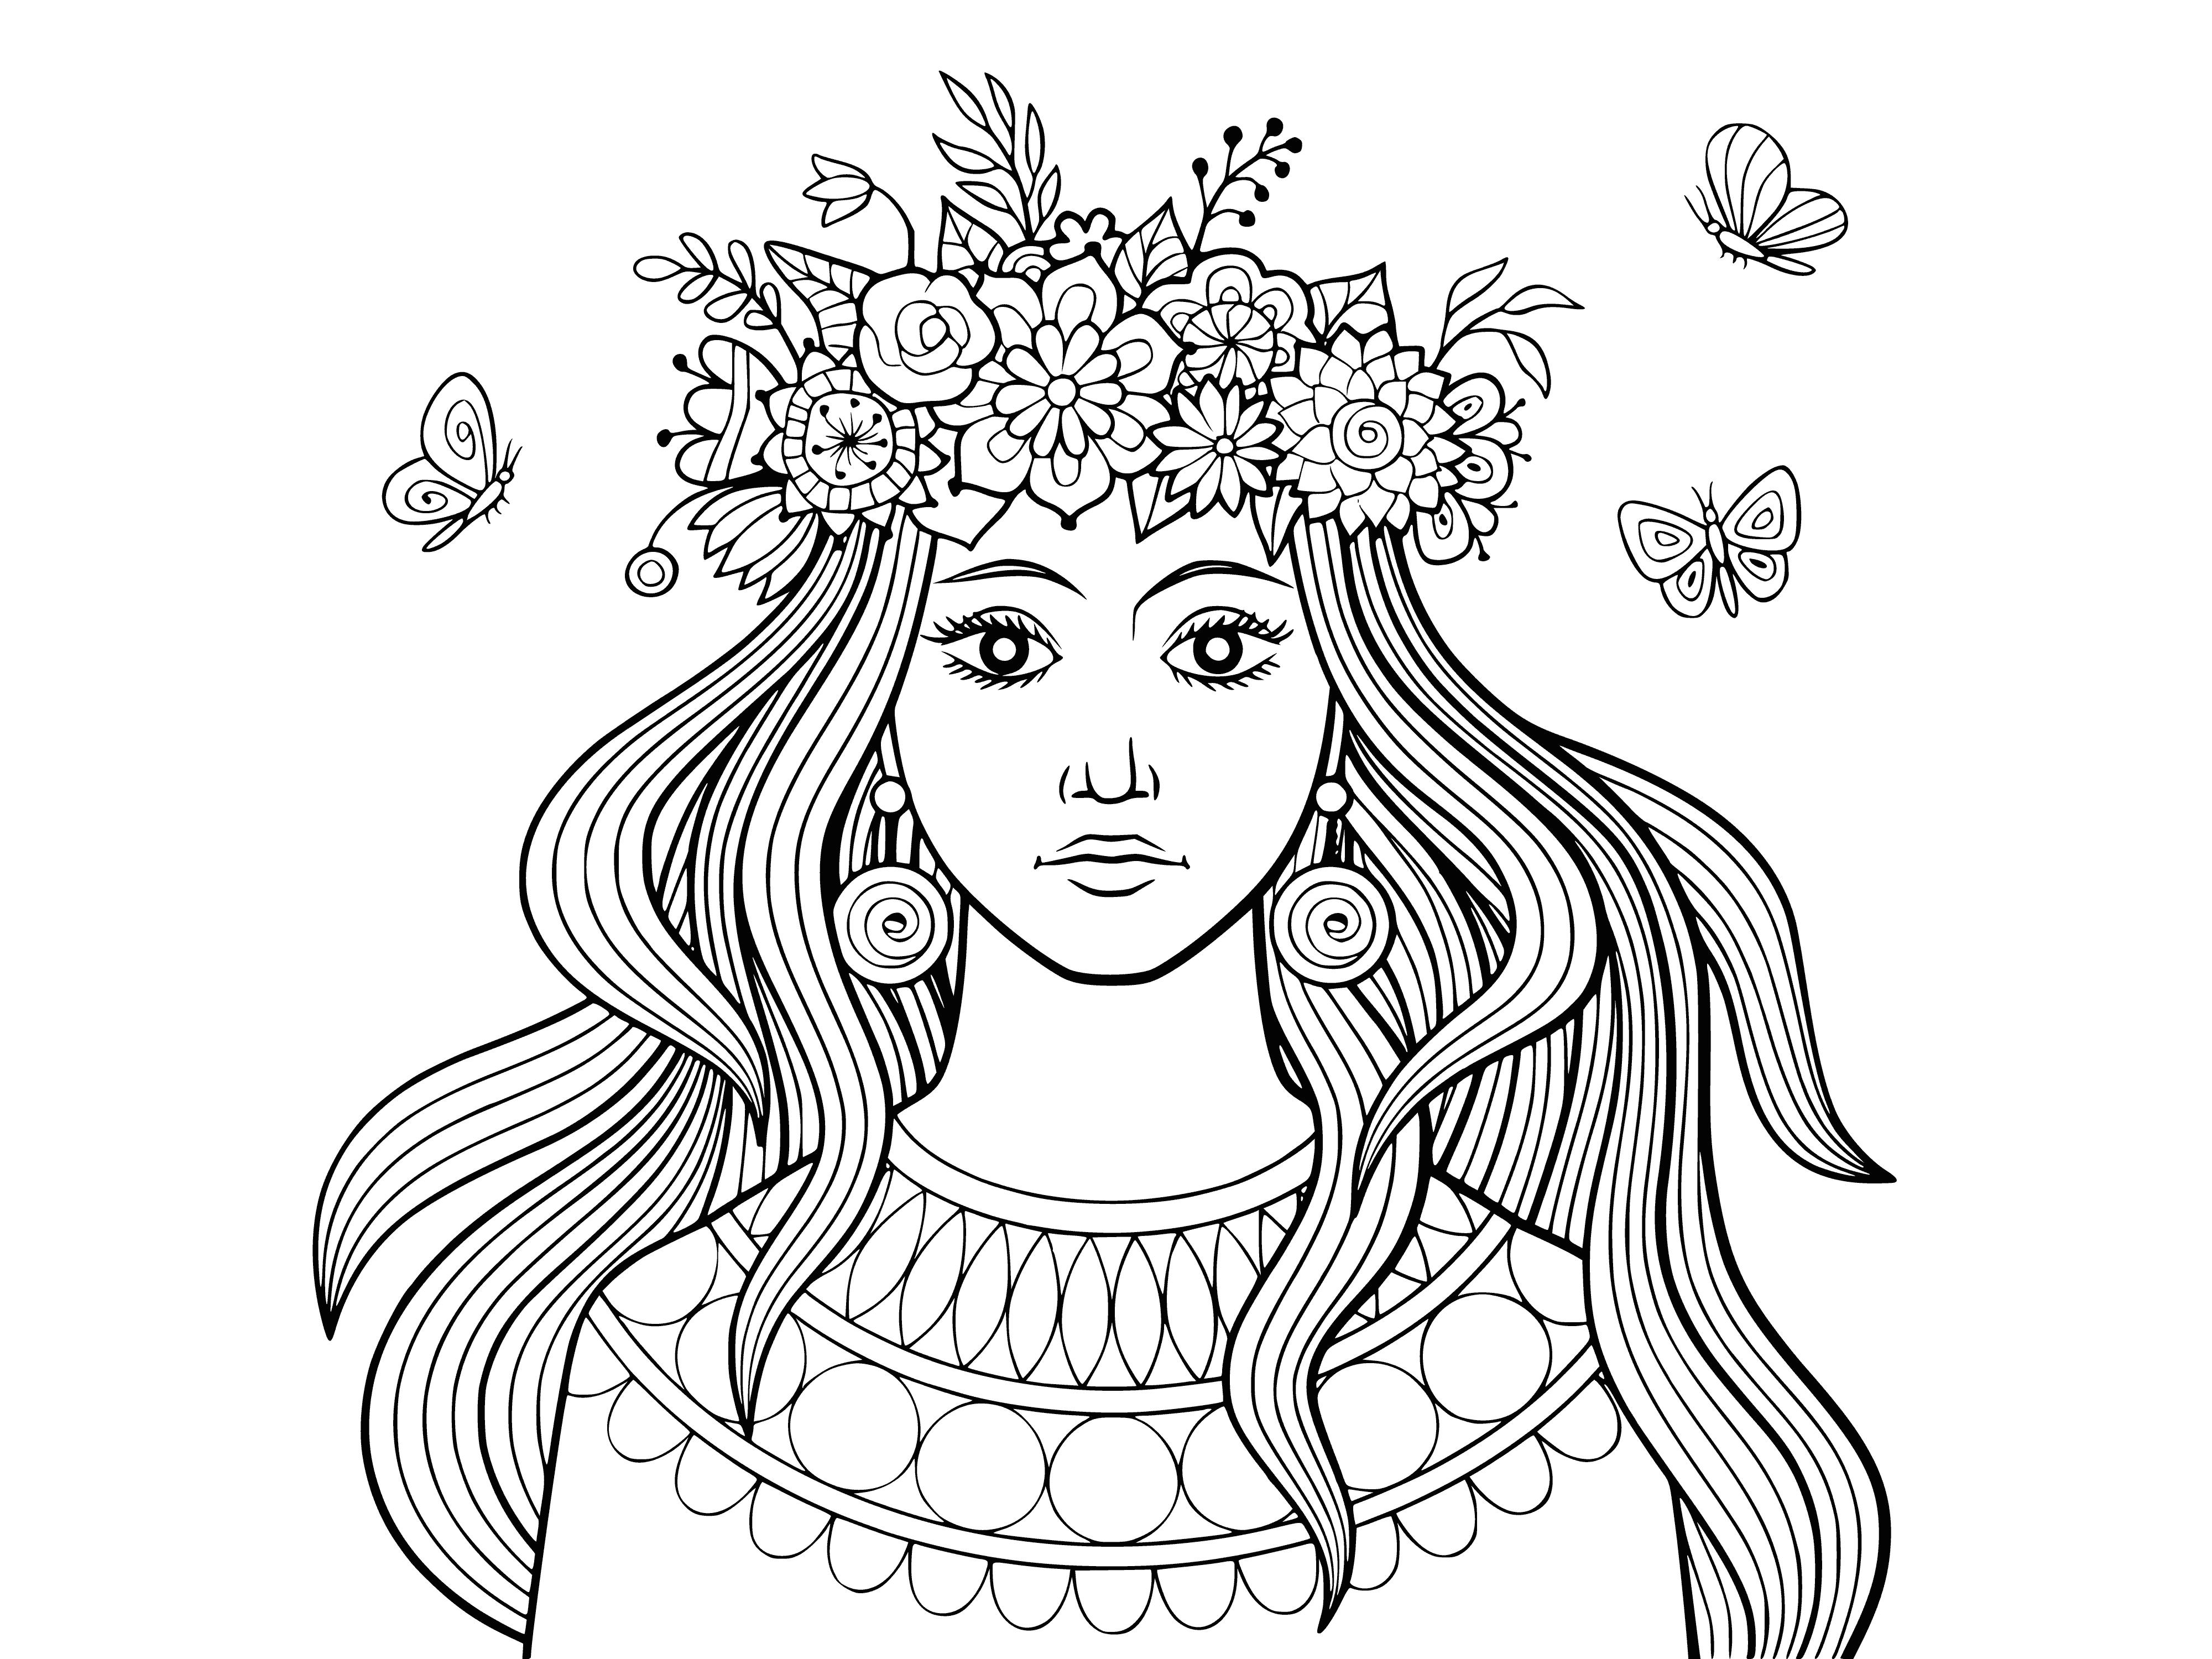 Beauty in a wreath coloring page